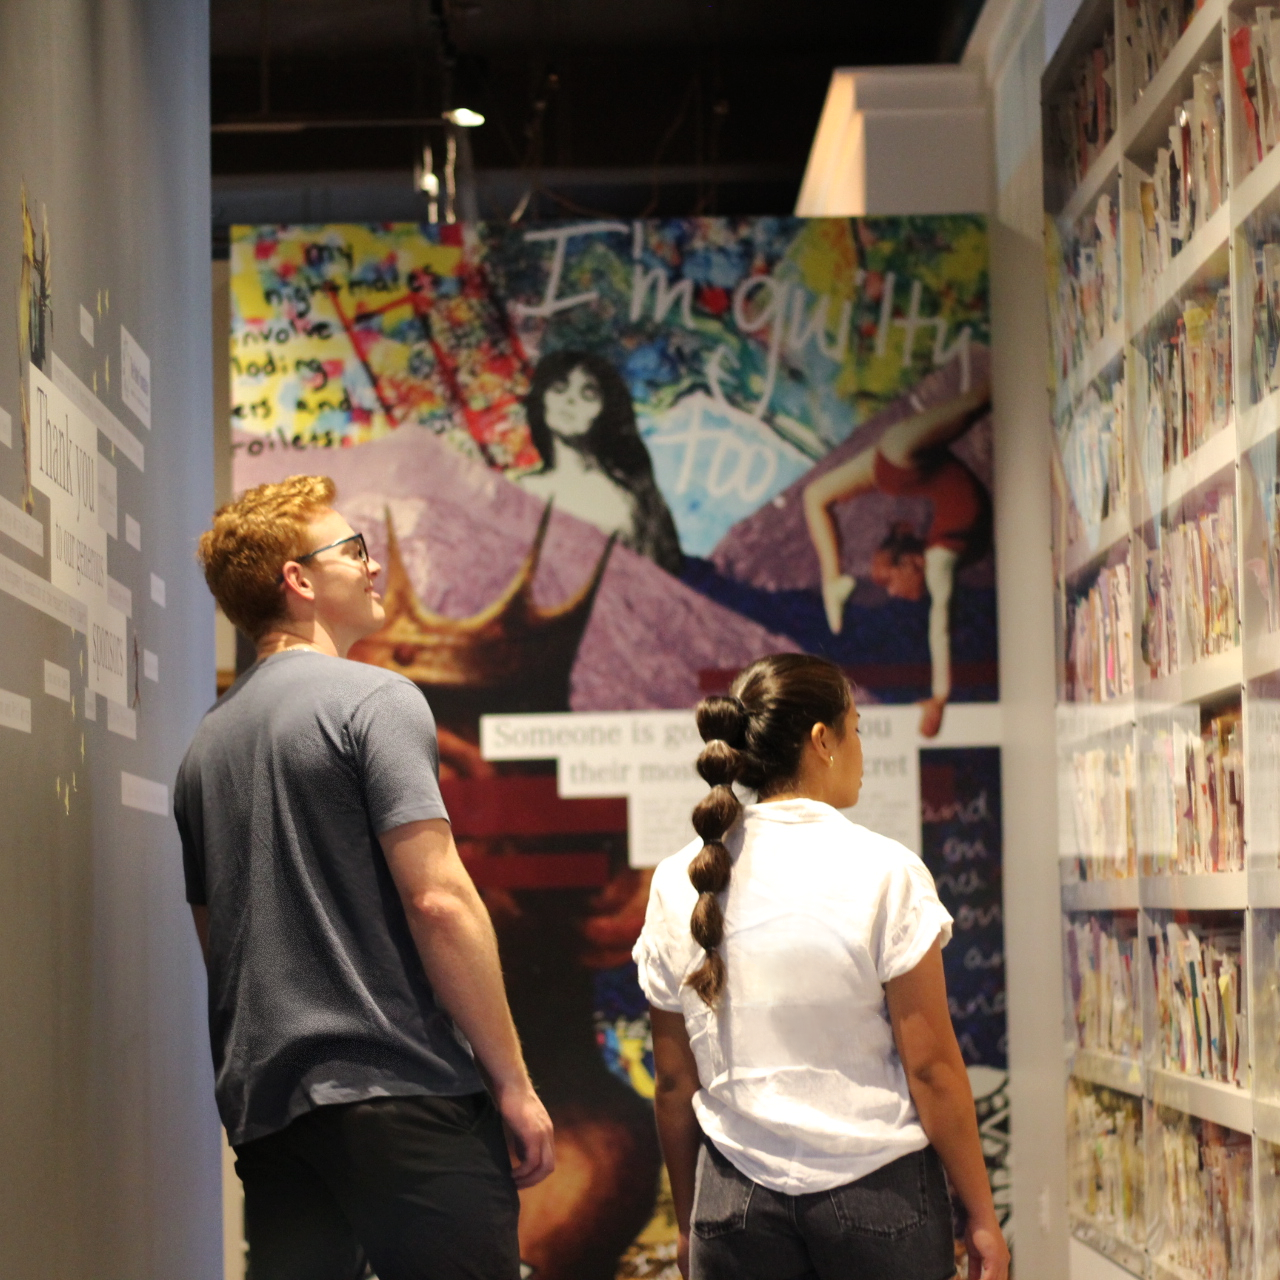 Two people walking down a hallway lined with hundreds of postcards in the "PostSecret" exhibit.